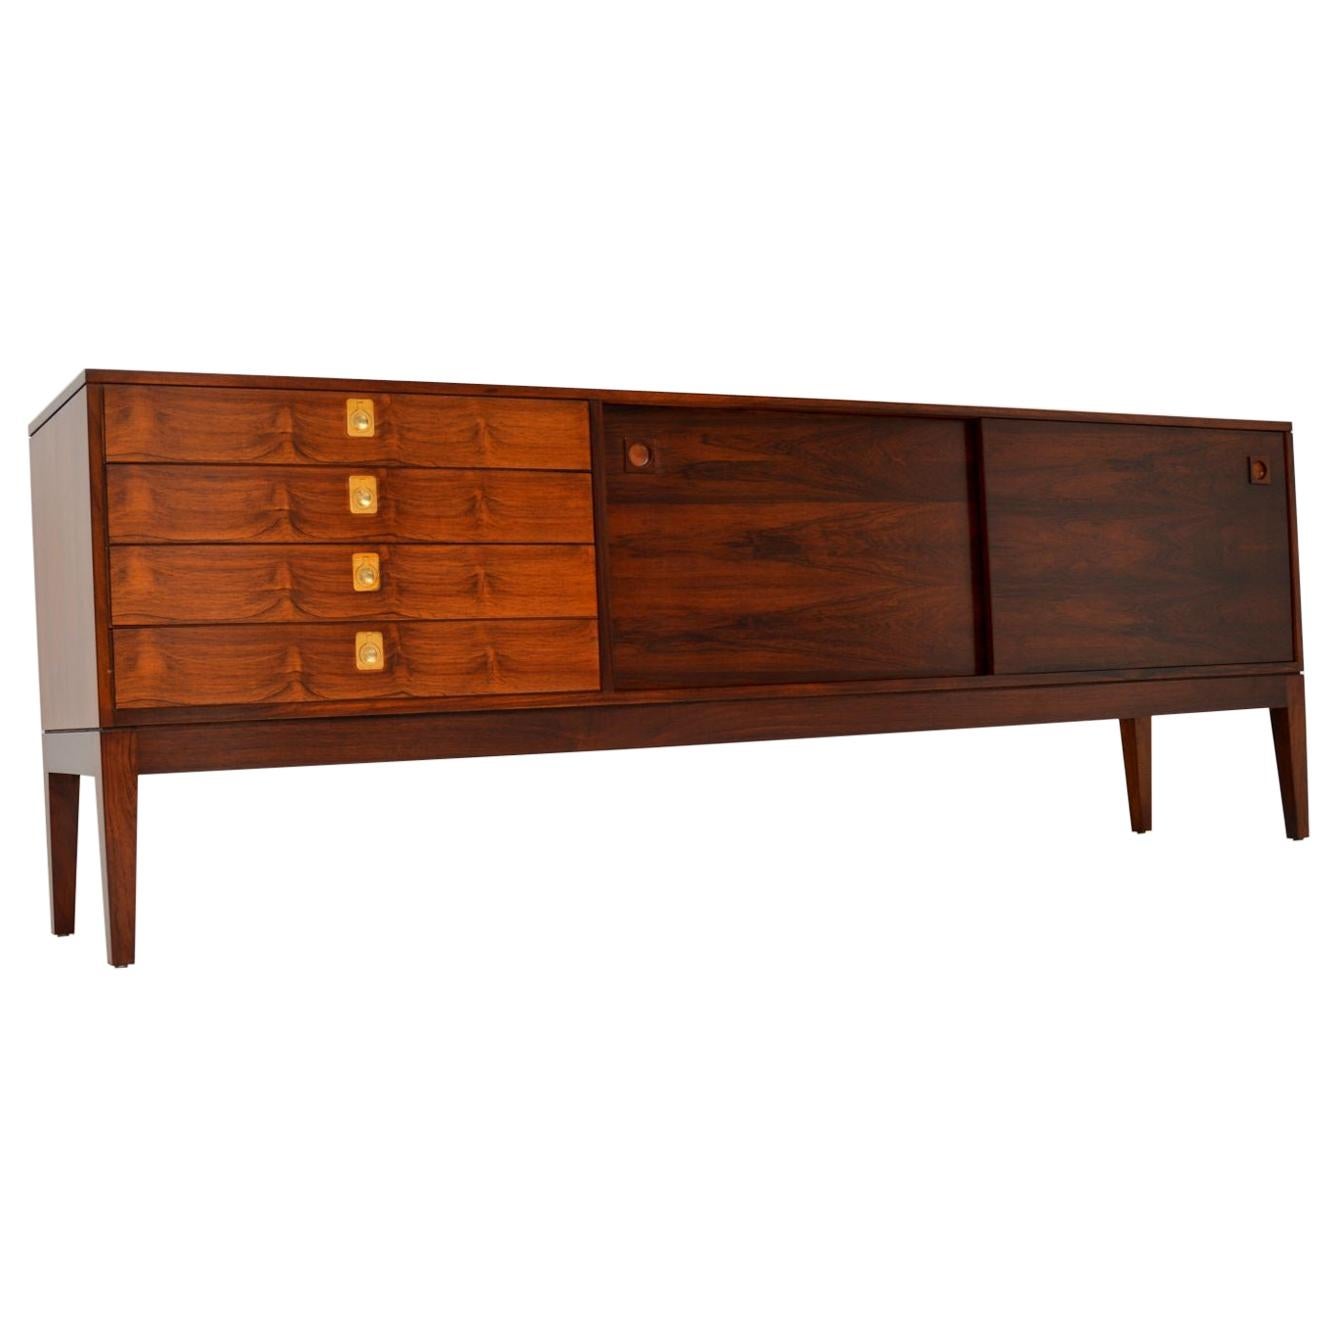 1960s Sideboard by Robert Heritage for Archie Shine